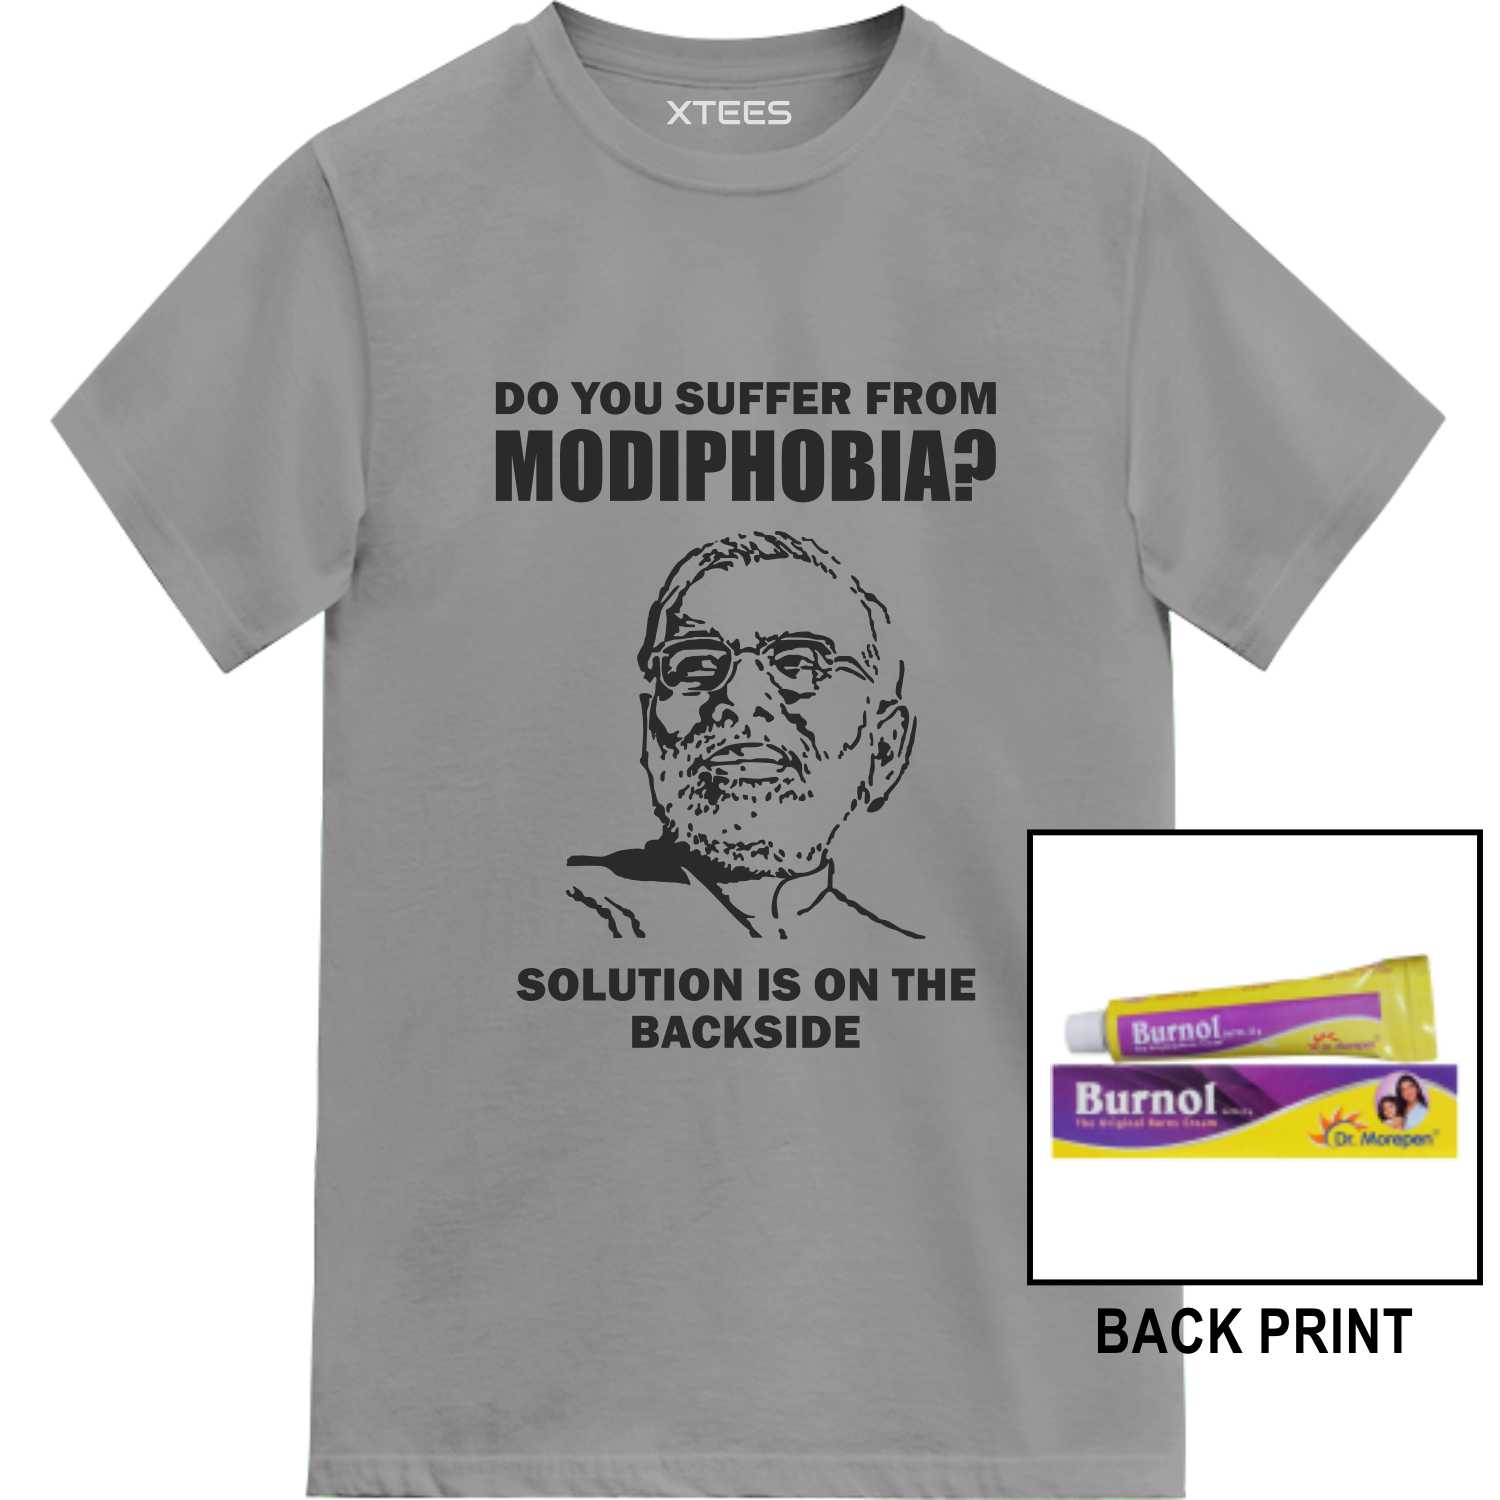 Do You Suffer From Modiphobia Solution Is On The Backside Burnol T-shirt image